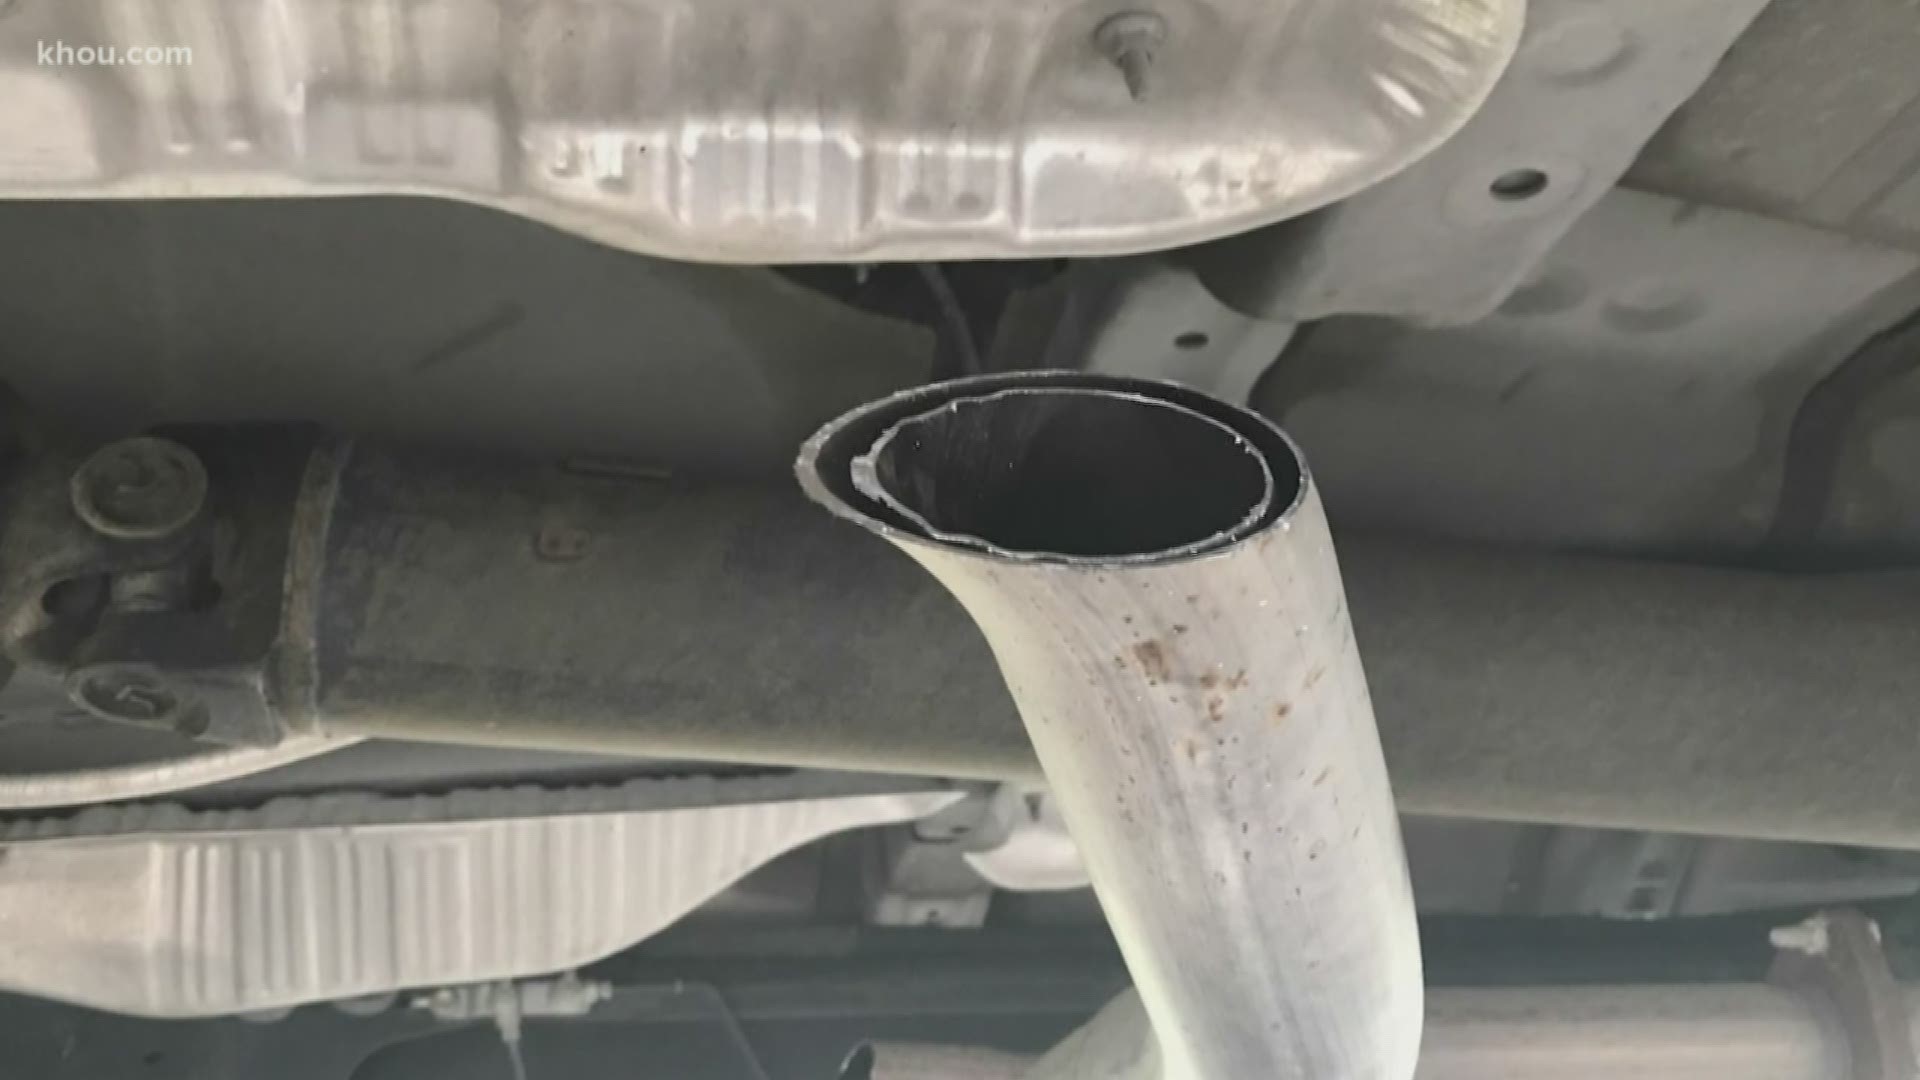 Drivers in Katy need to keep a close eye on their cars. Crooks are climbing underneath vehicles and taking the catalytic converters. They even hit a student's car while it was parked outside a school.